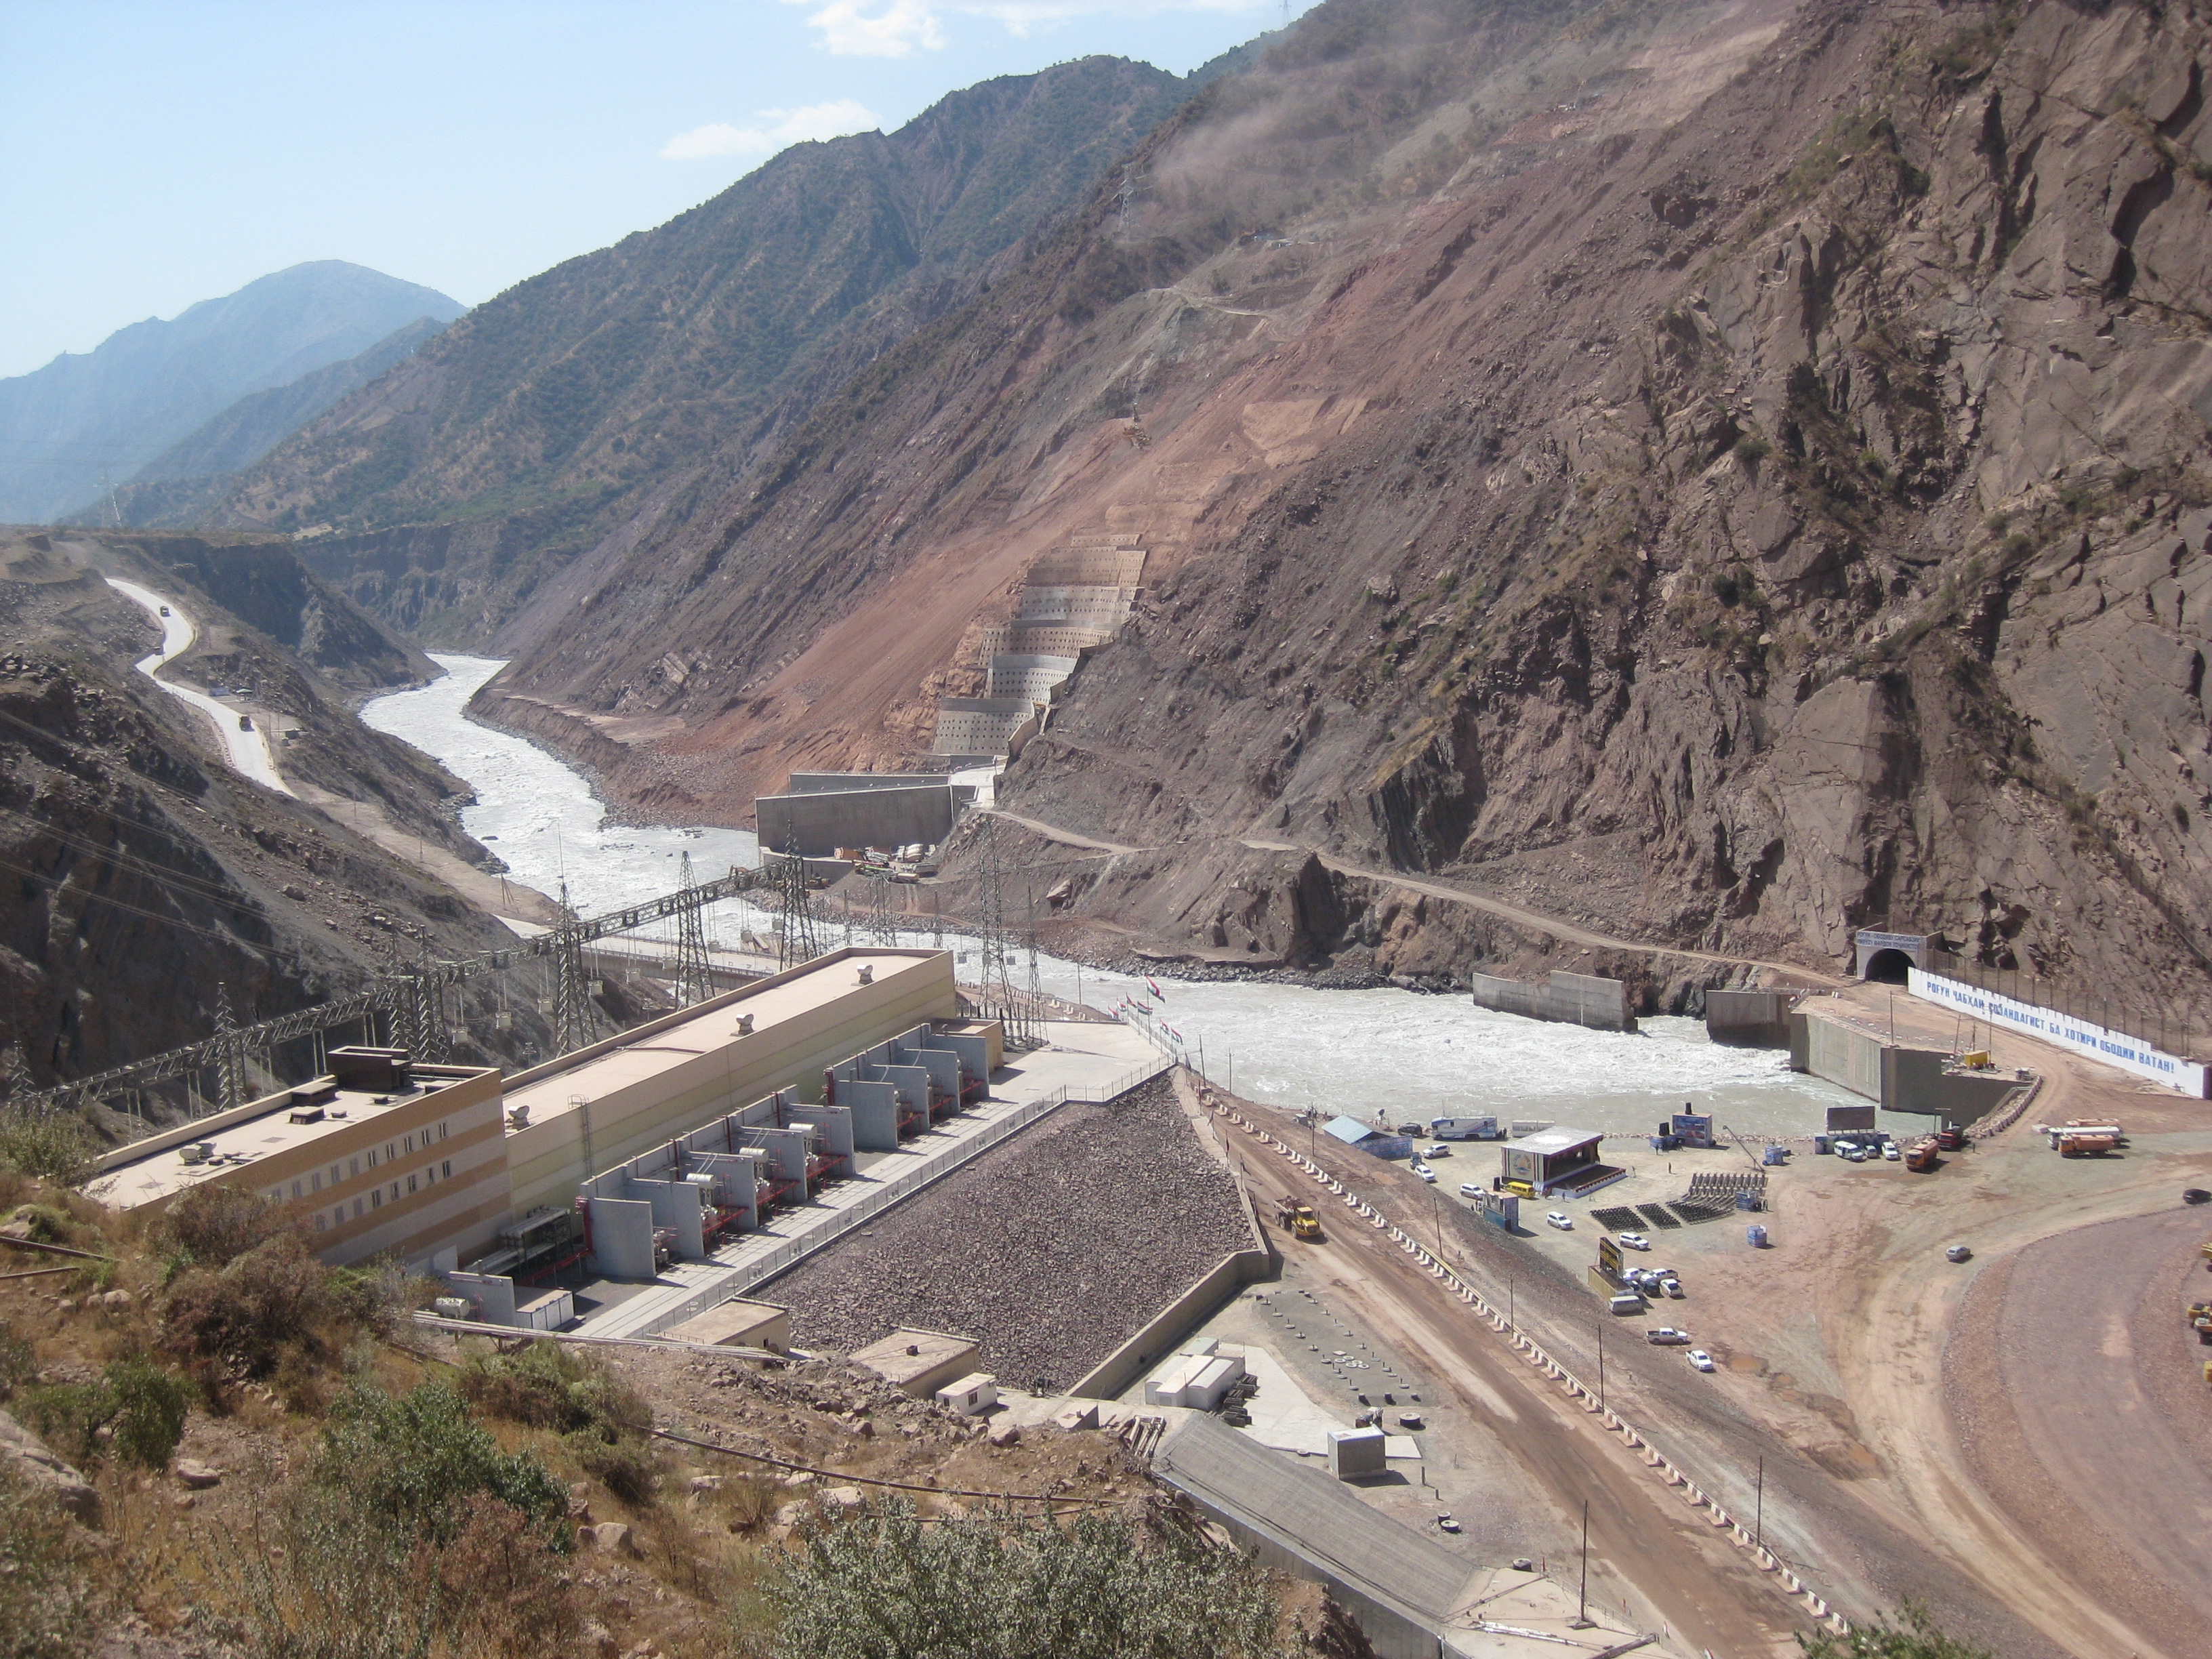 The hydroelectric power plant